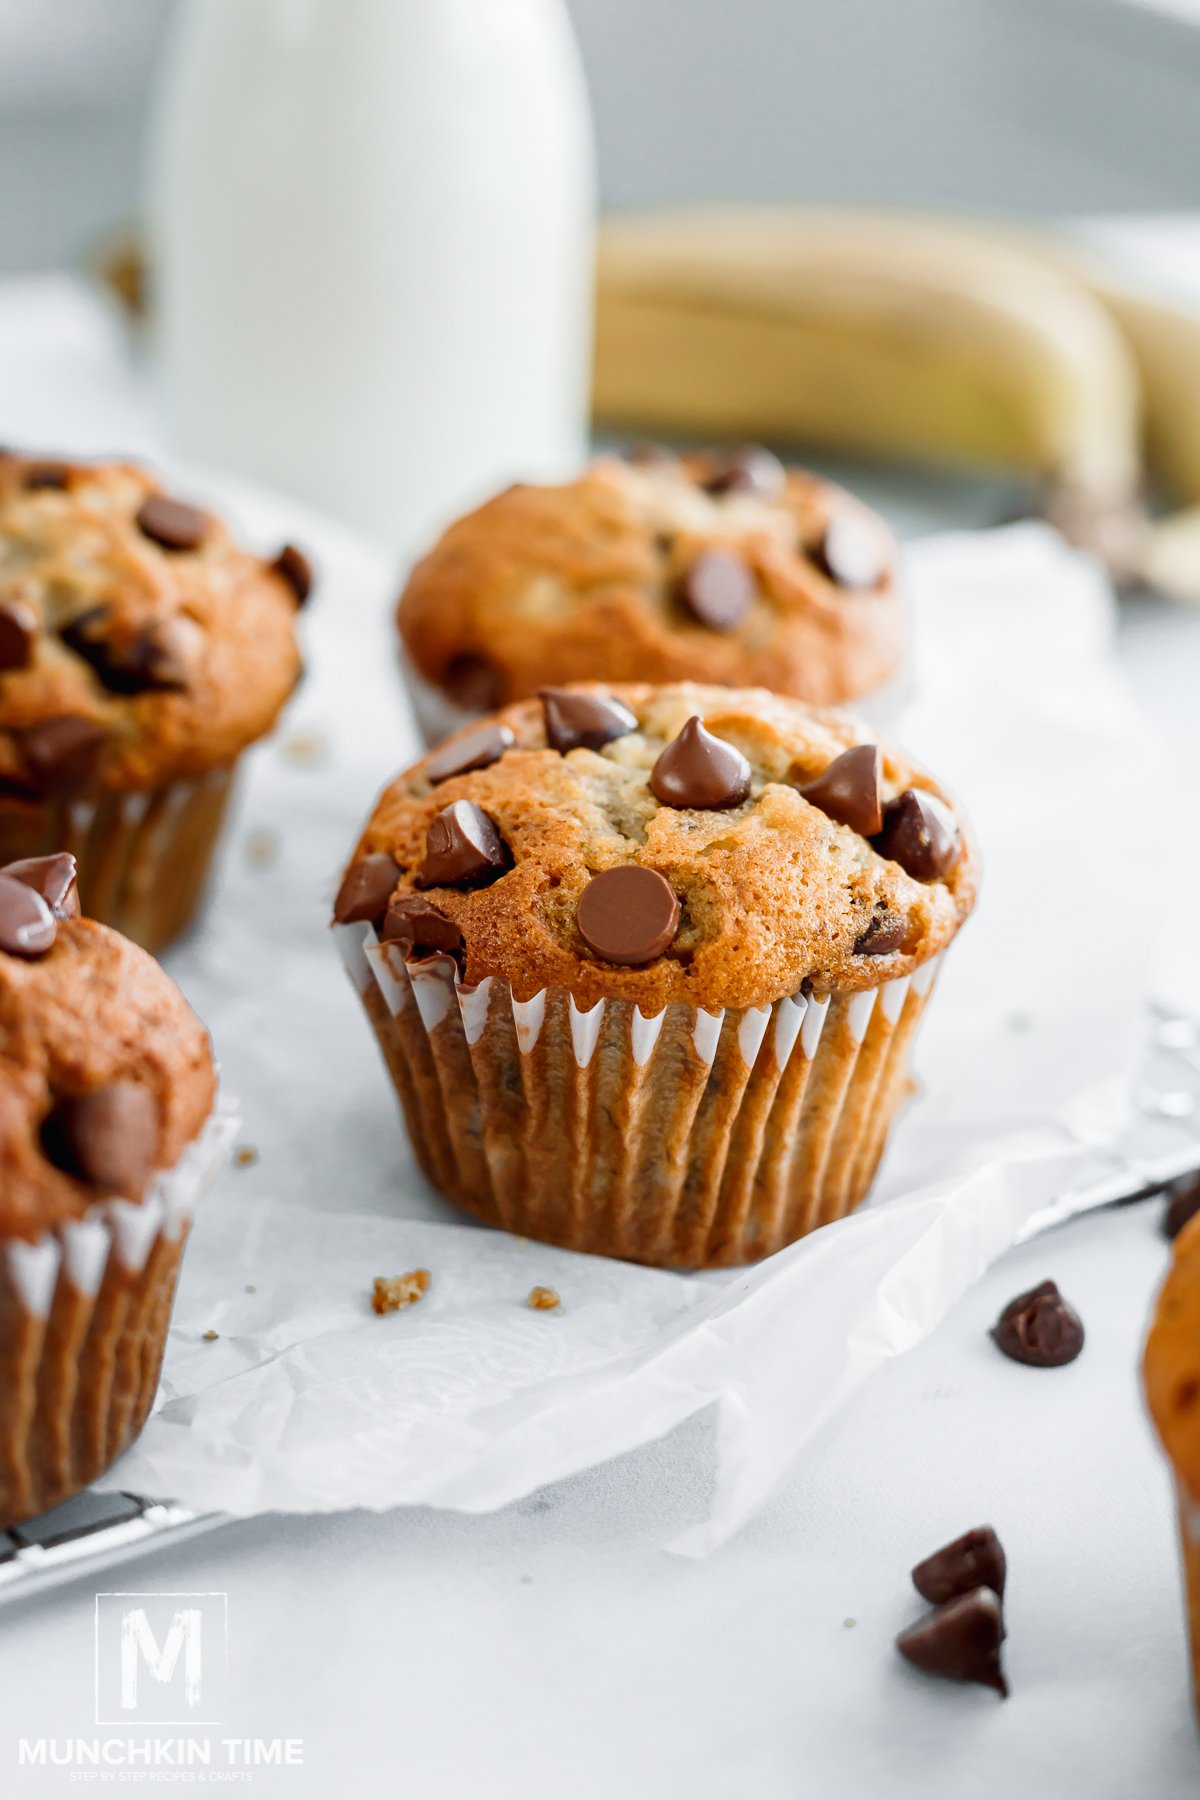 These dairy-free banana muffins are moist